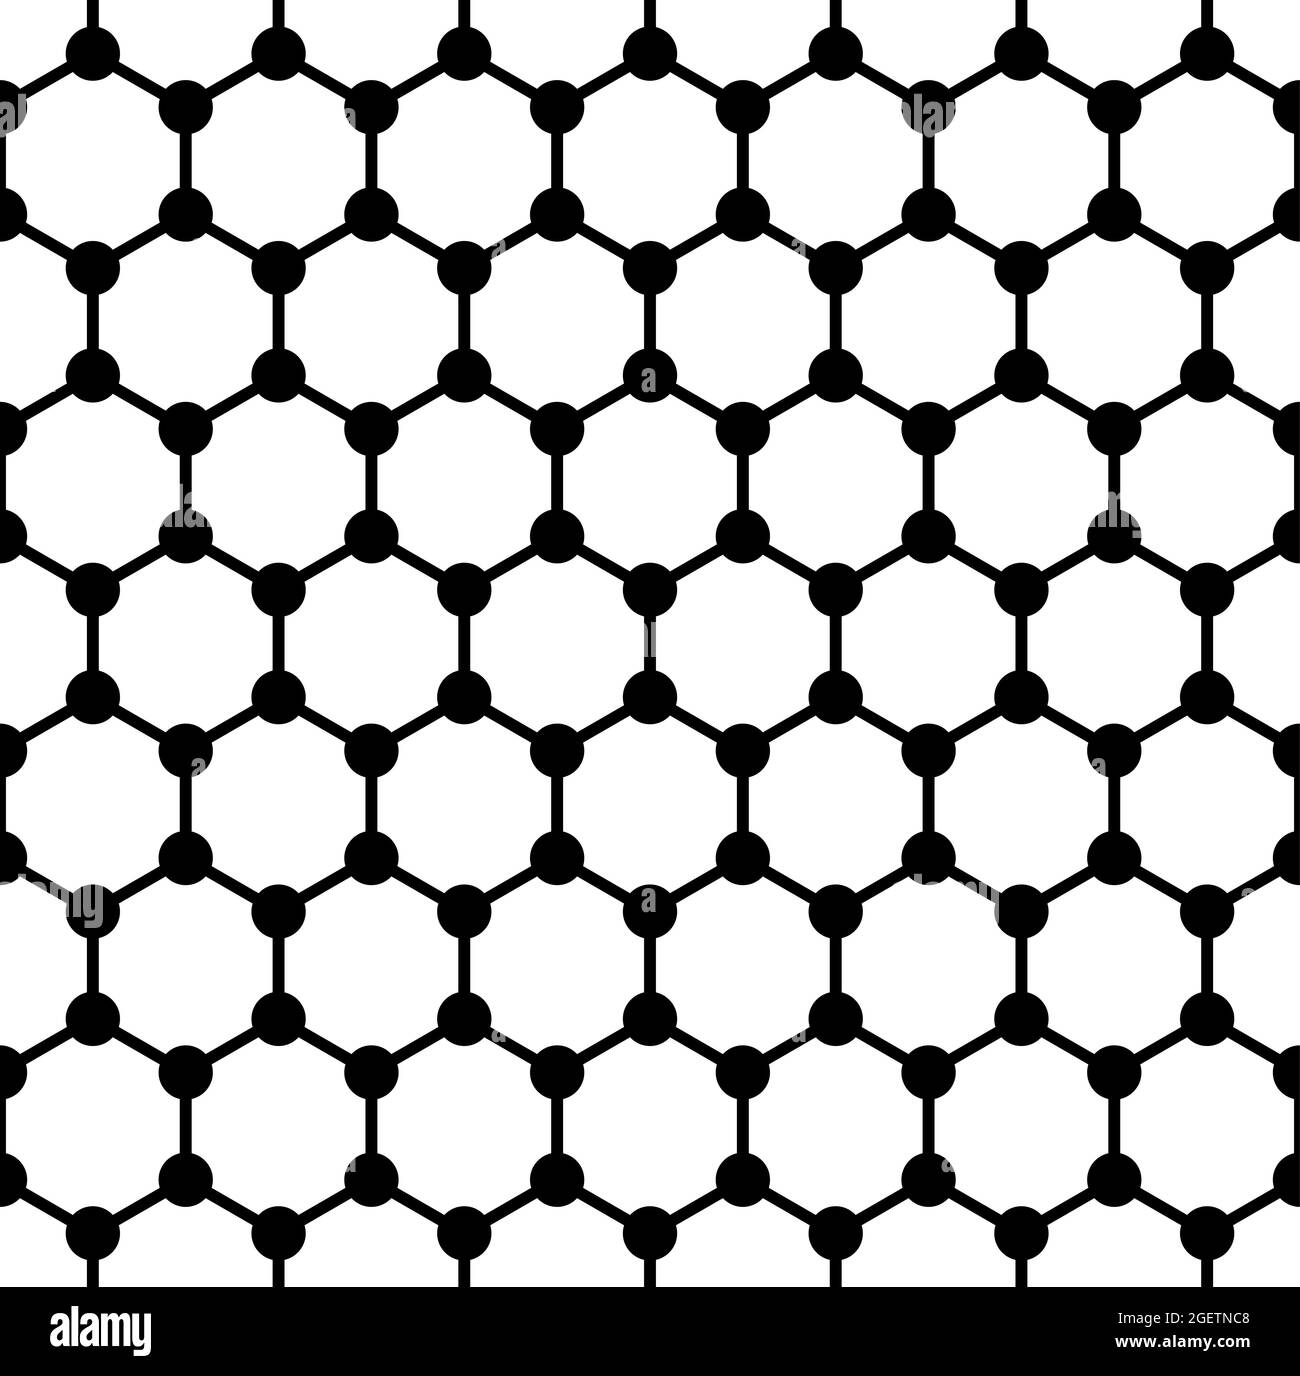 Bold graphene structure, seamless tile, schematic molecular structure of graphene, allotrope of carbon, single layer of carbon atoms in hexagonal grid. Stock Photo